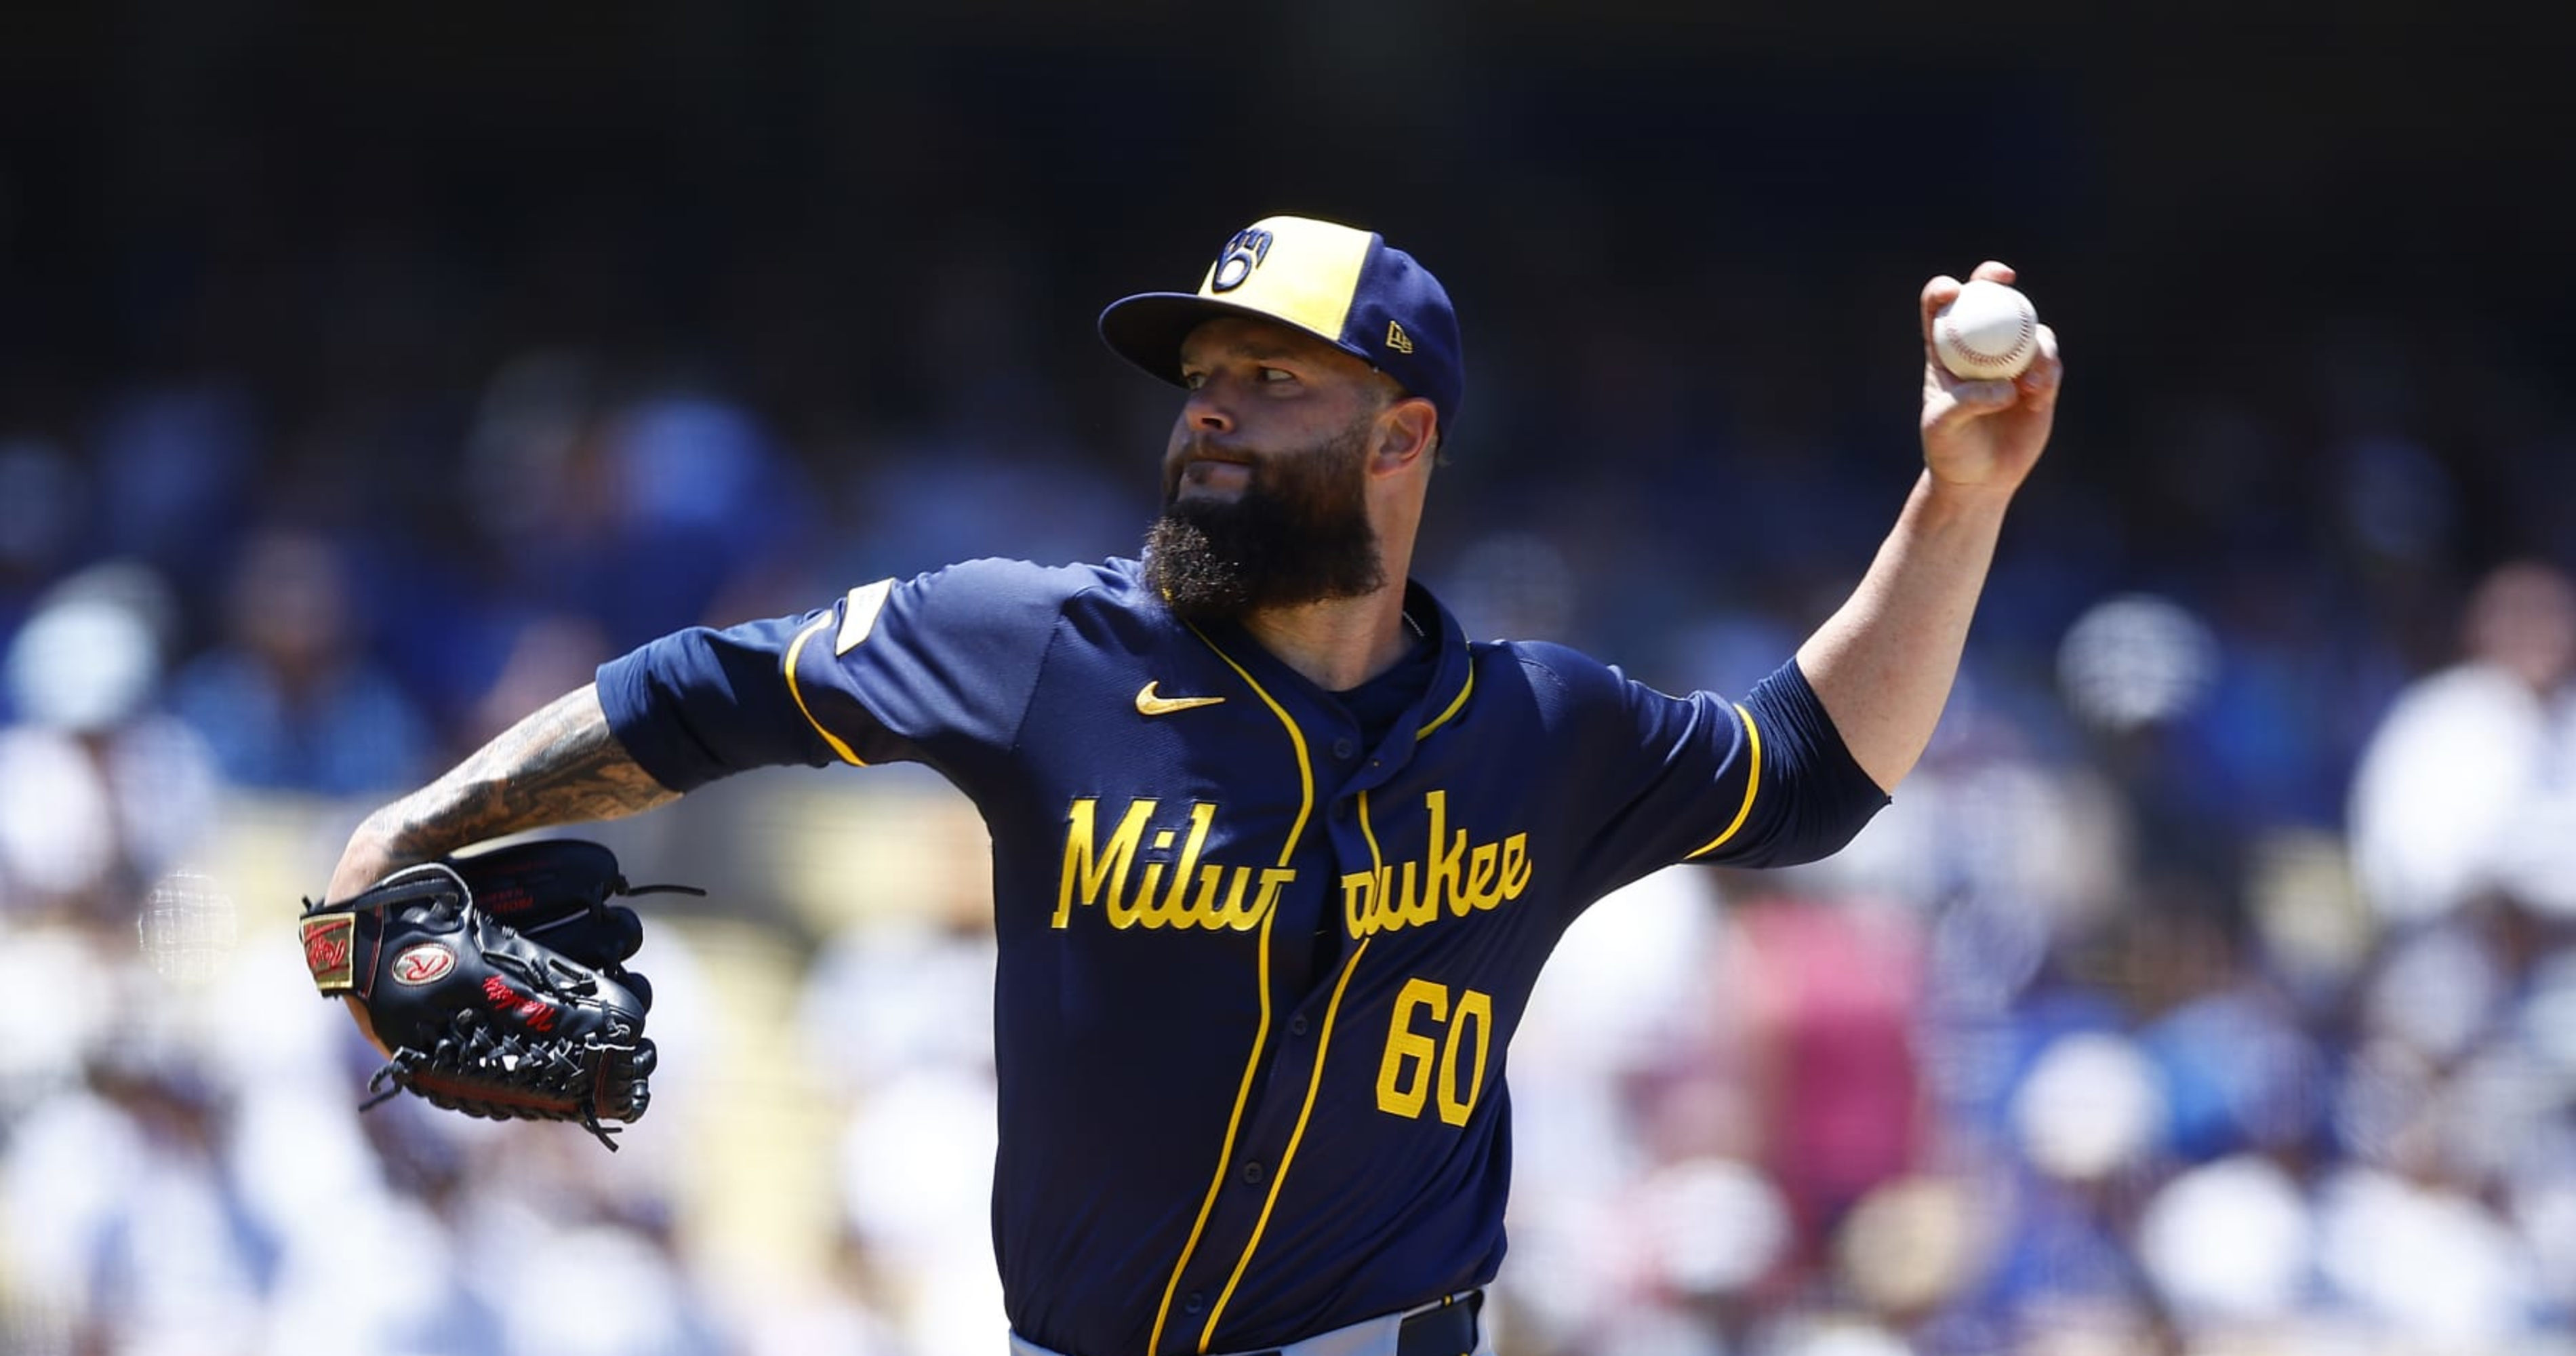 Dallas Keuchel DFA'd by Brewers After 4 Starts; SP Traded from Mariners in June